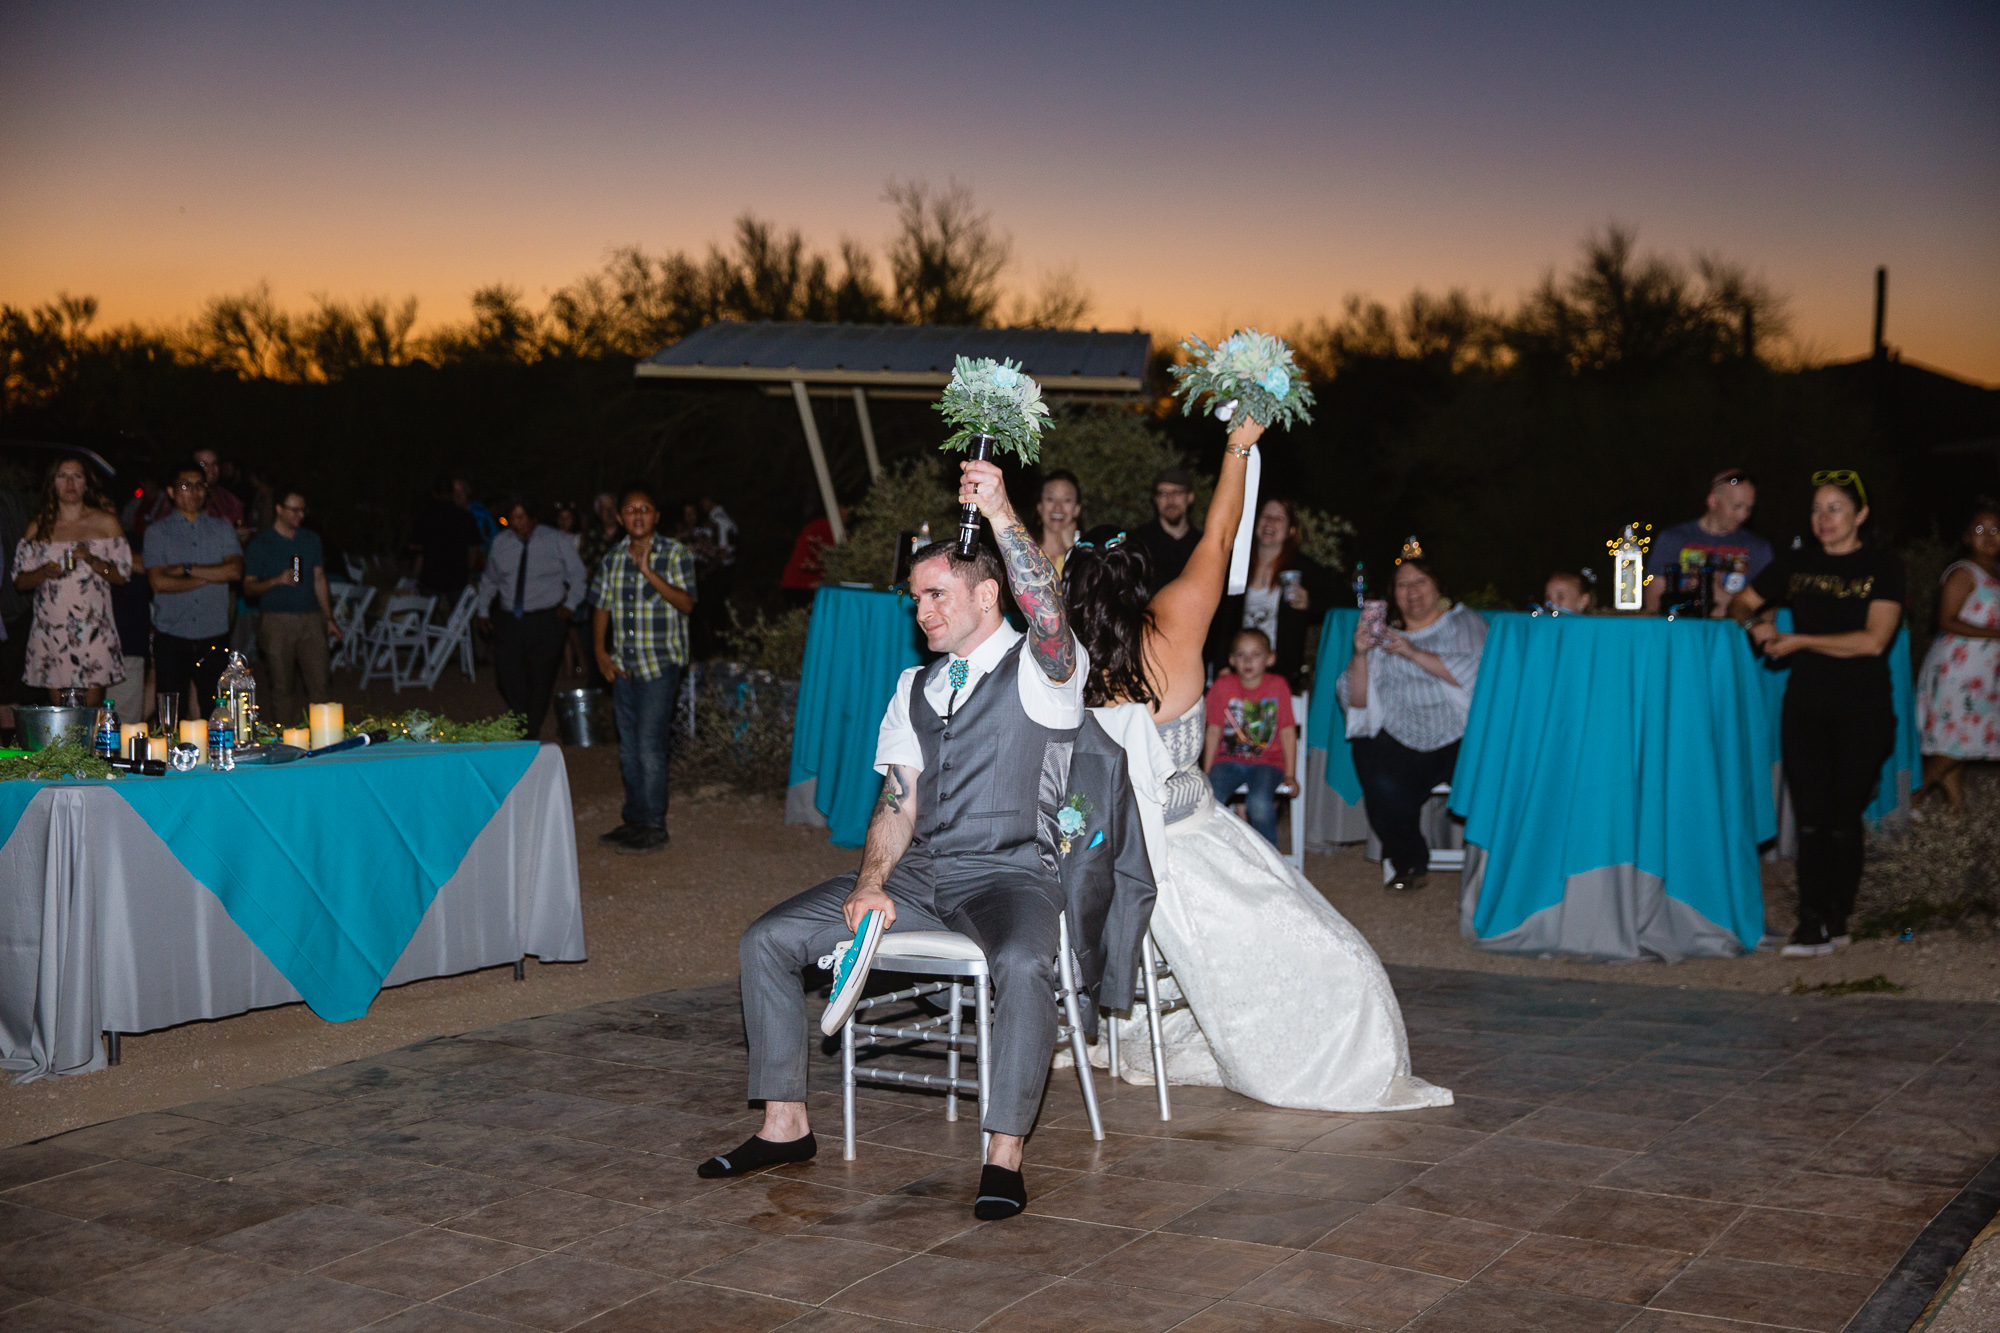 Bride and groom play the newlywed shoe game with turquoise converse and bouquets at their wedding reception by PMA Photography.